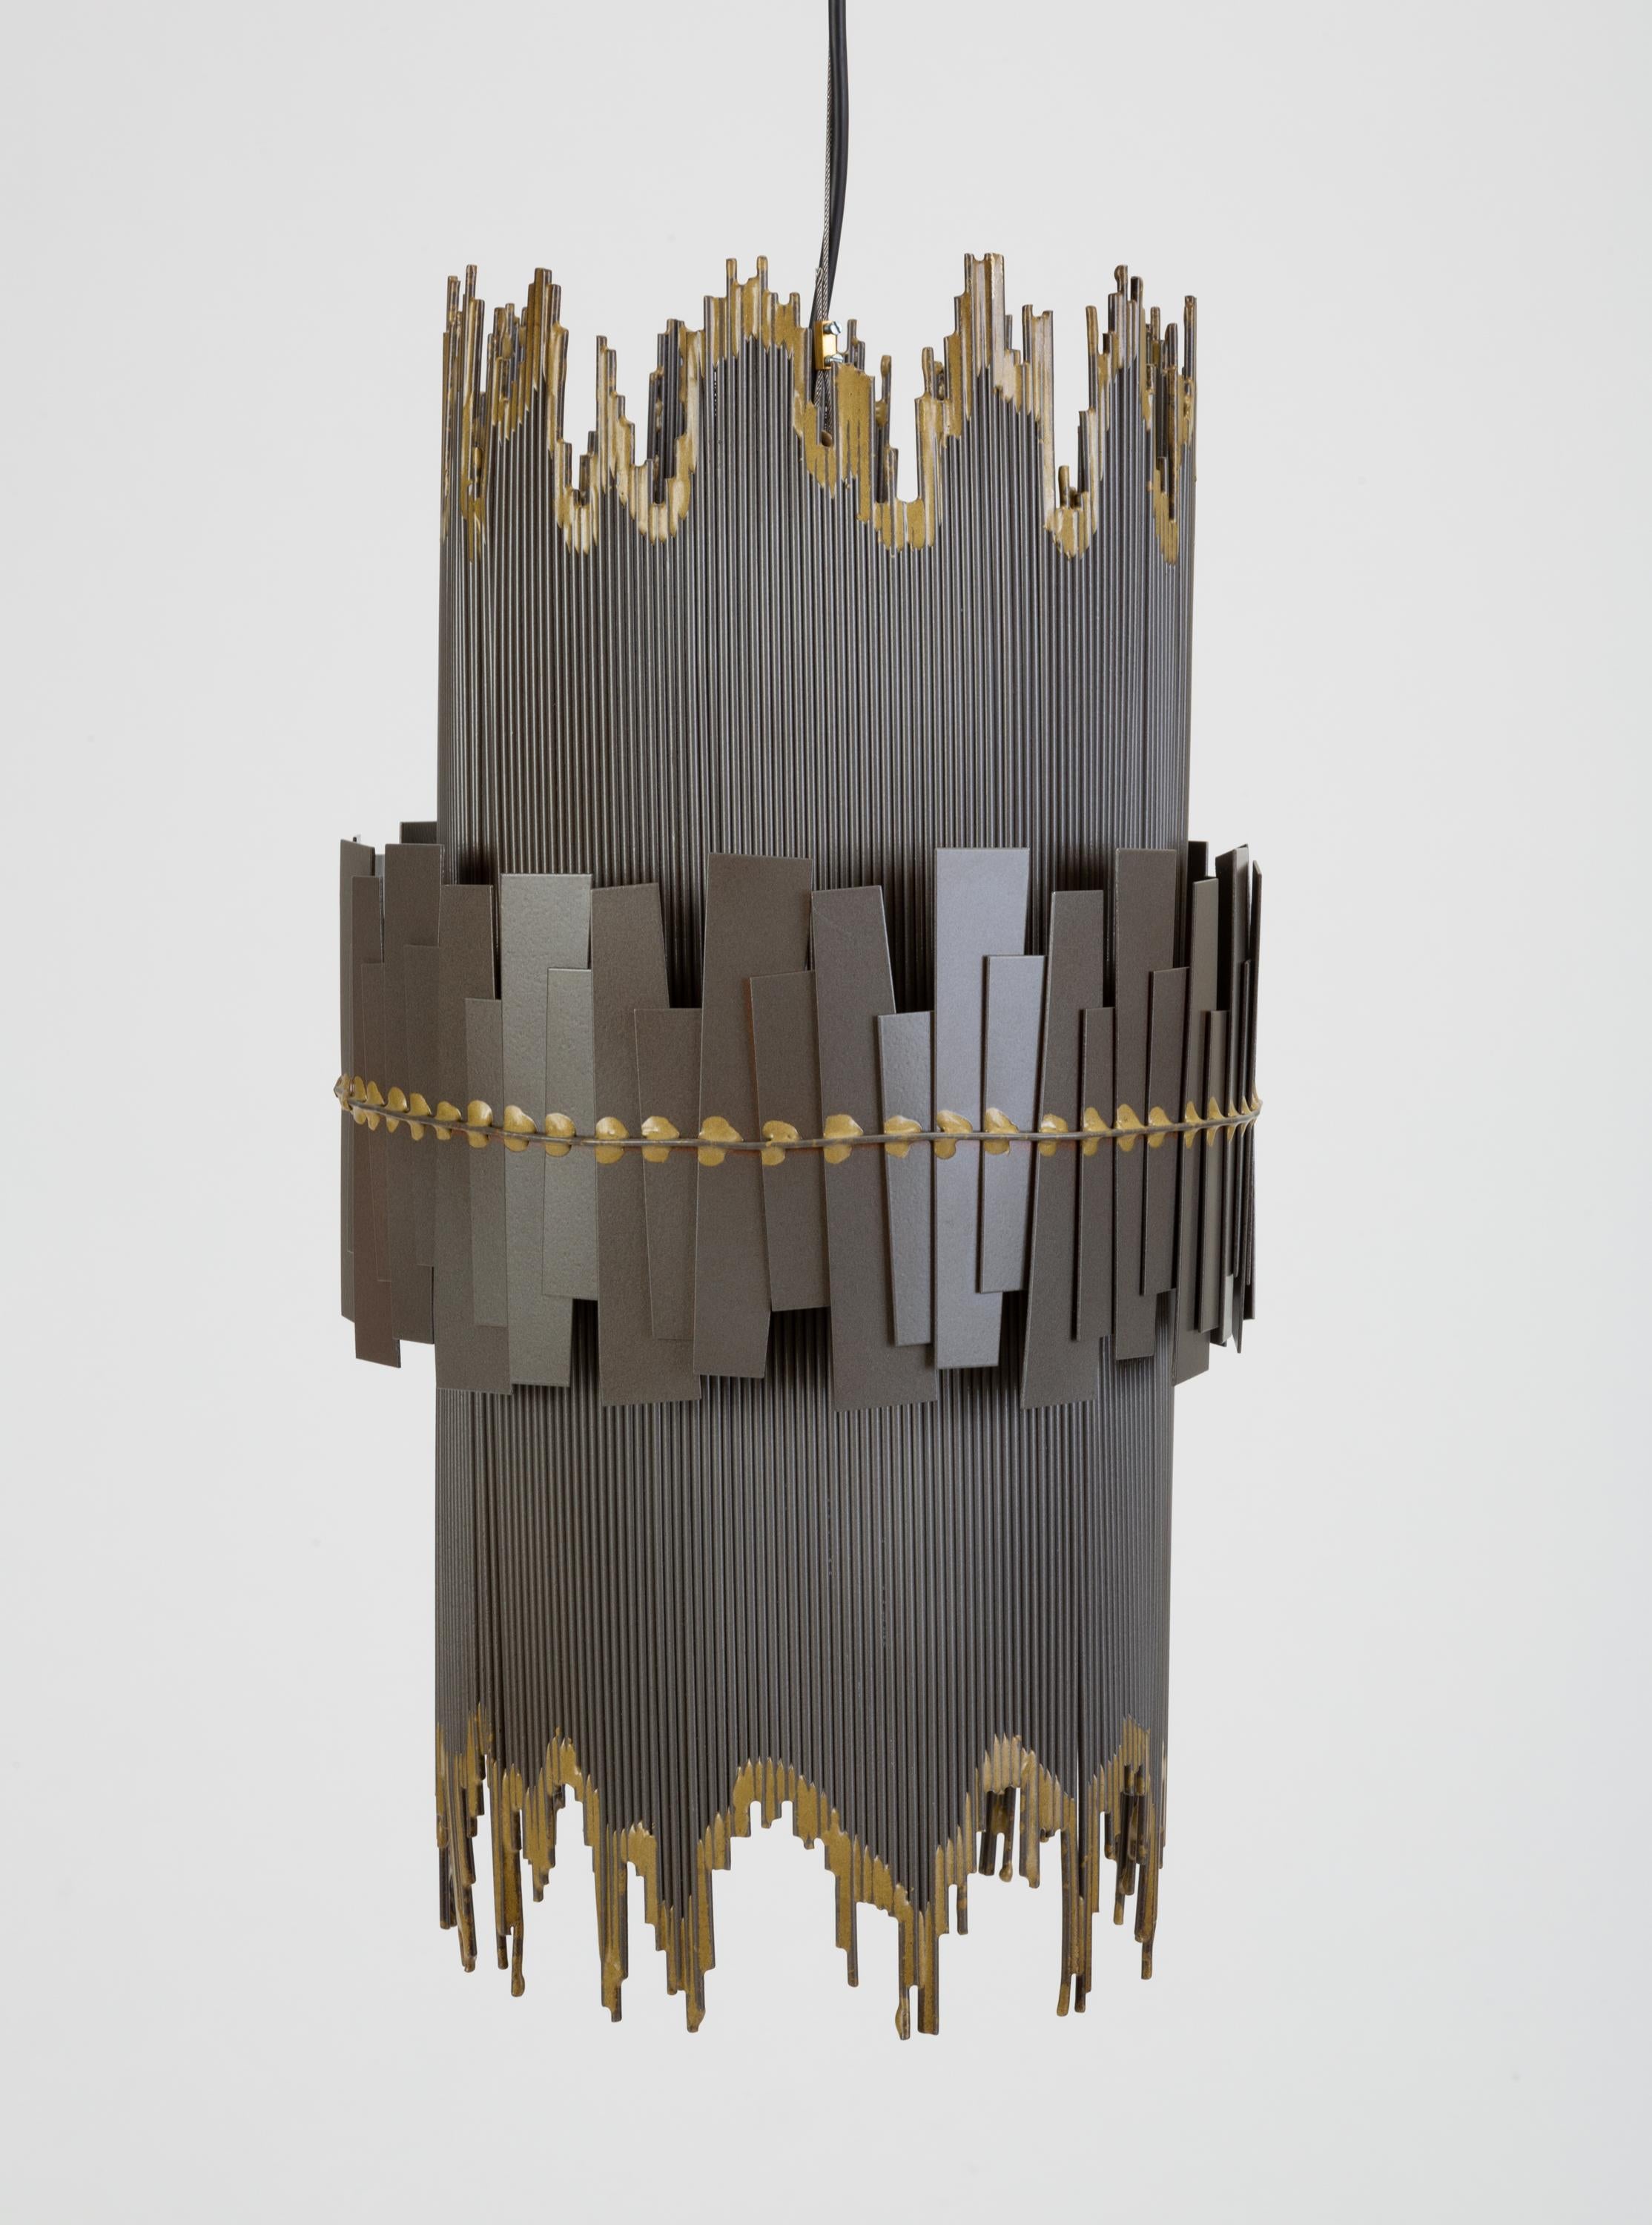 A brutalist metal pendant lamp with a cylindrical shape and irregular edges. The main shape of the fixture has a striated frame with contrasting edges; a slightly wider ring of irregularly welded metal pieces wraps the central circumference of the